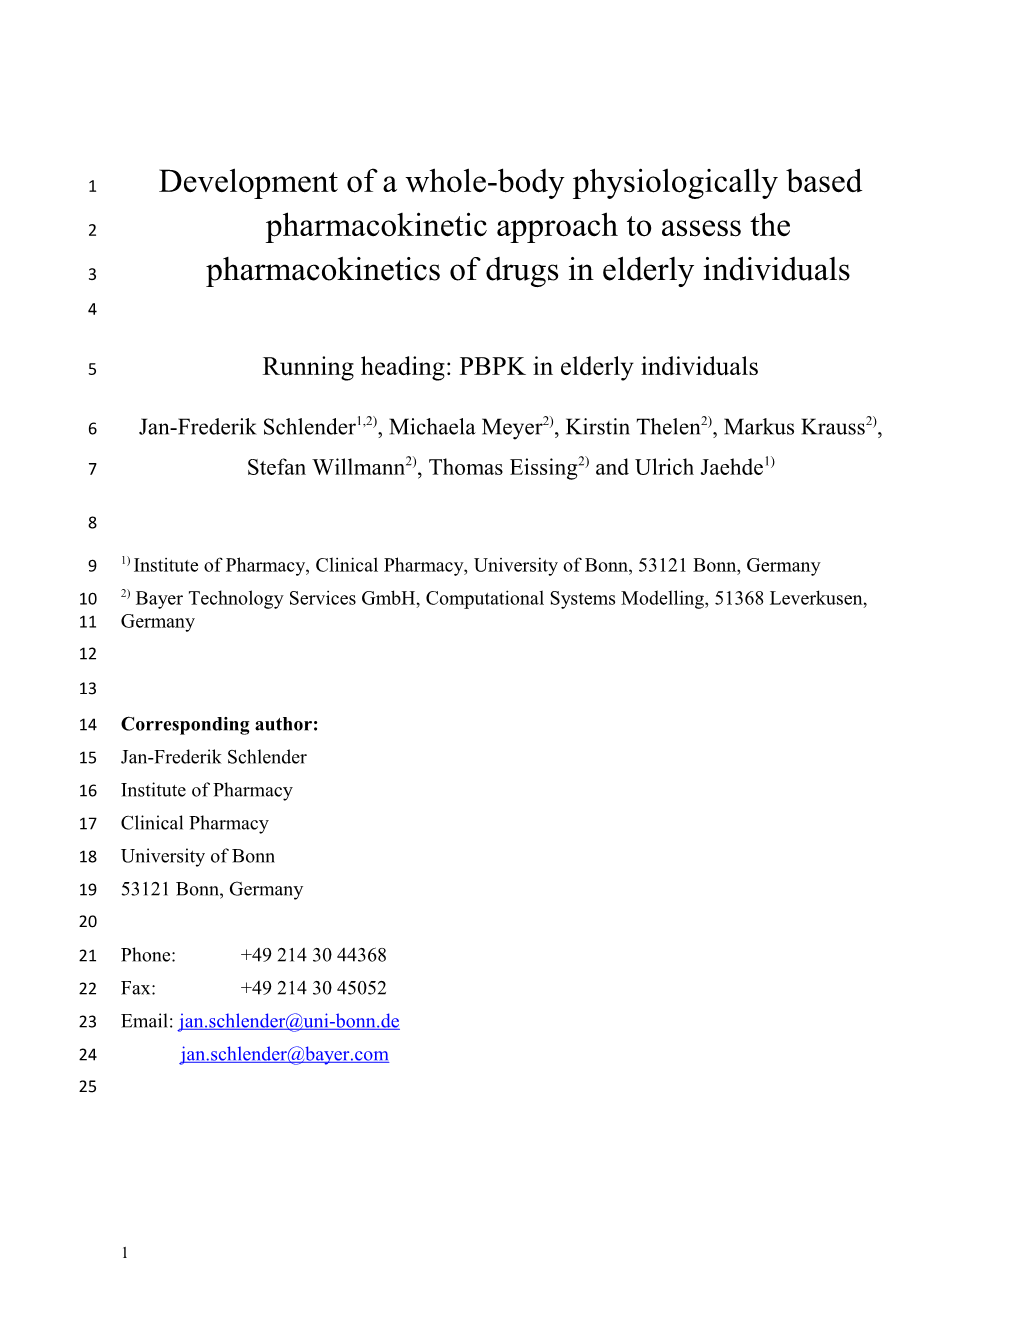 Development of a Whole-Body Physiologically Based Pharmacokinetic Approach to Assess The